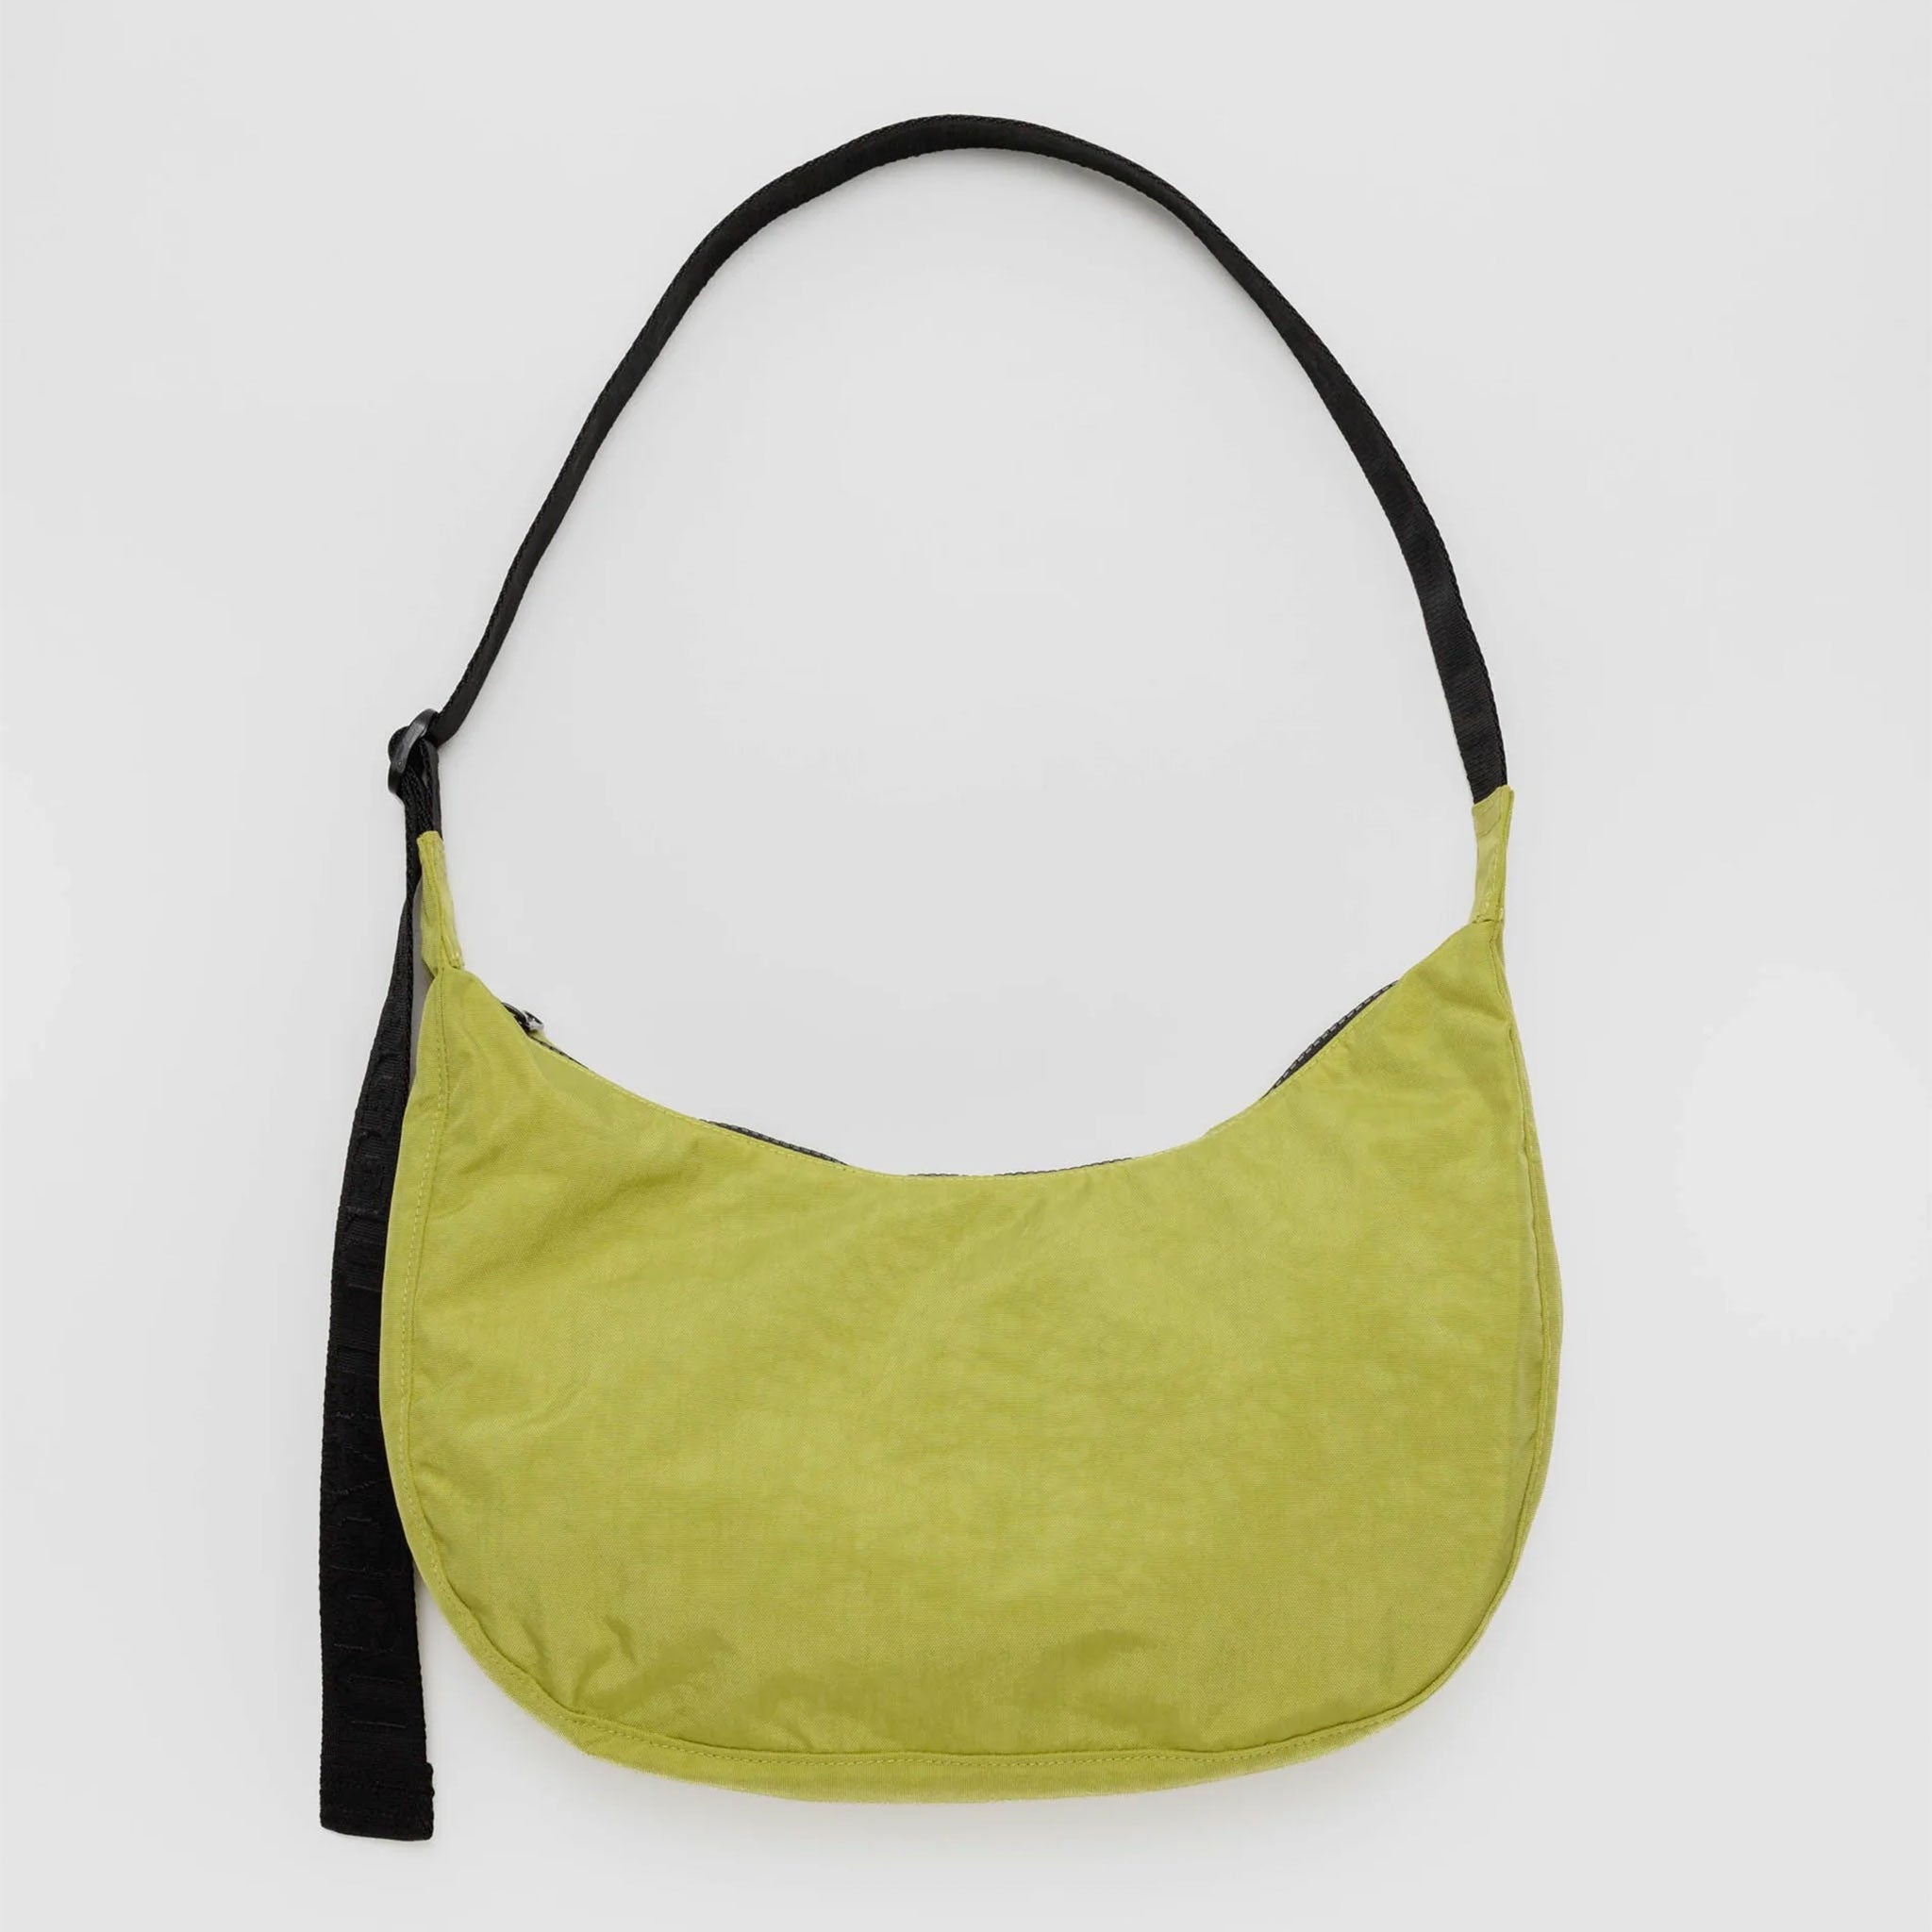 A crescent shaped bag in a lime green color with a black strap. 